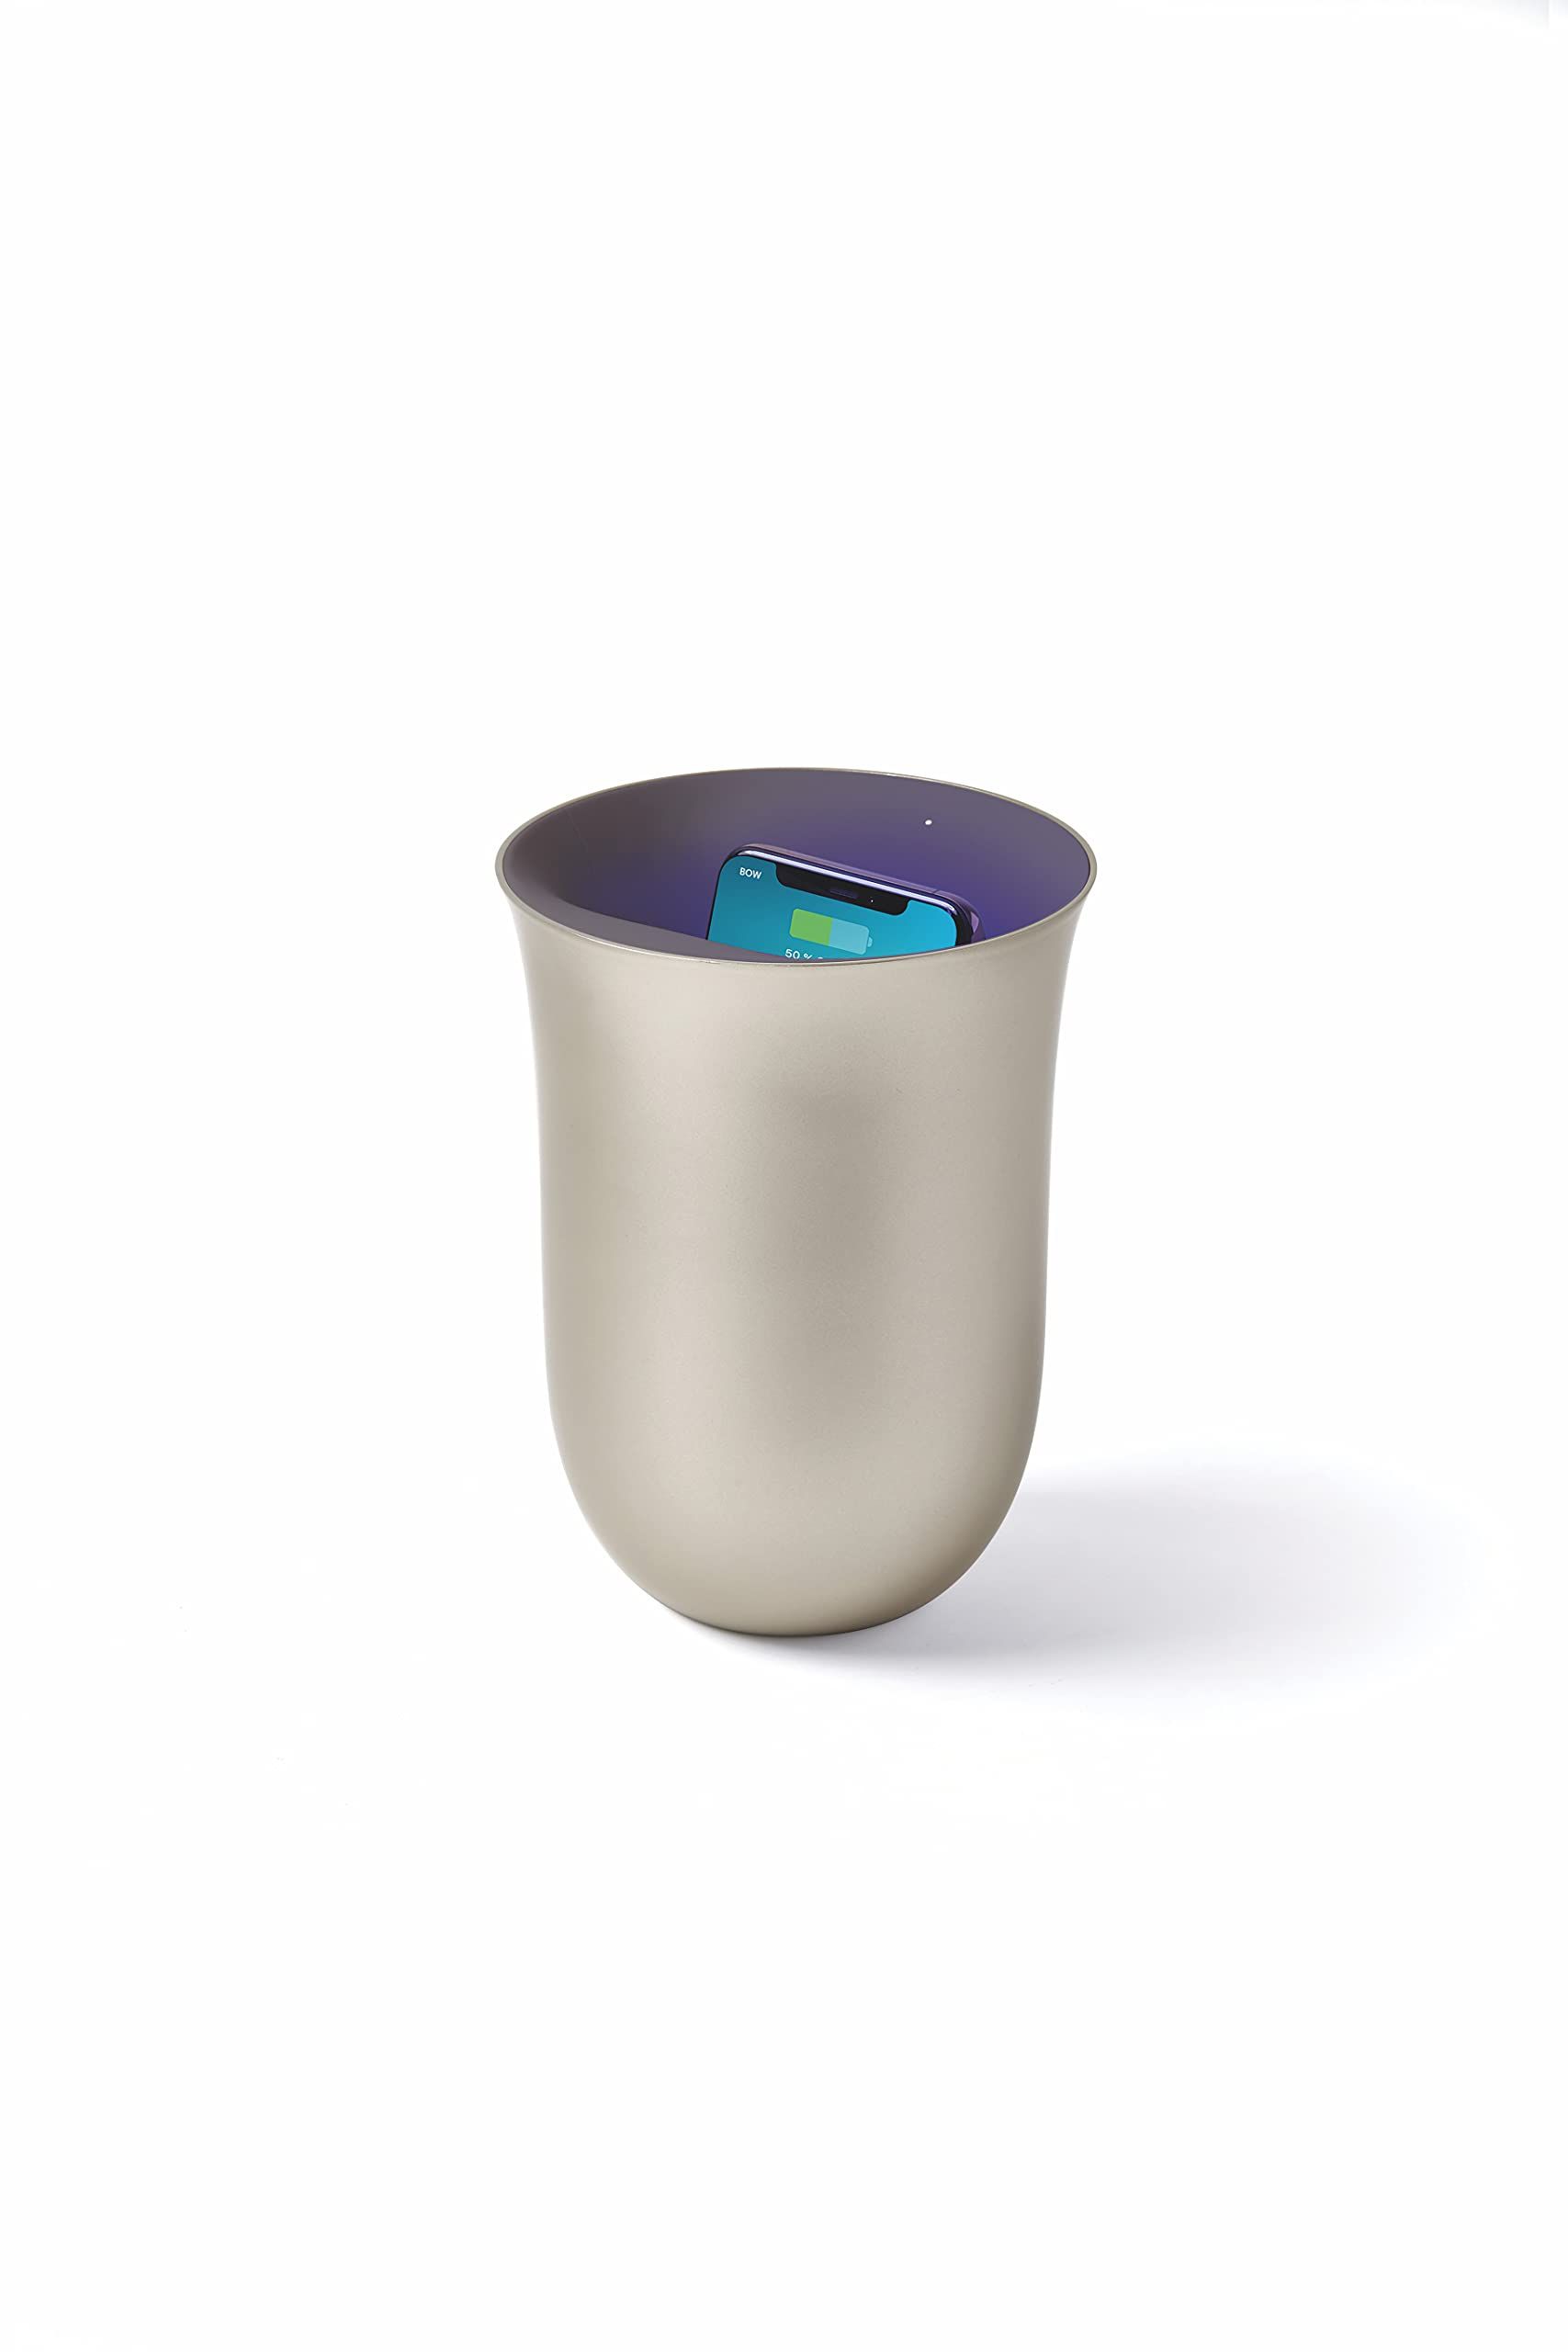 Lexon OBLIO - QI Wireless Charger Station with Built-in UV Sanitizer - Gold | Amazon (US)